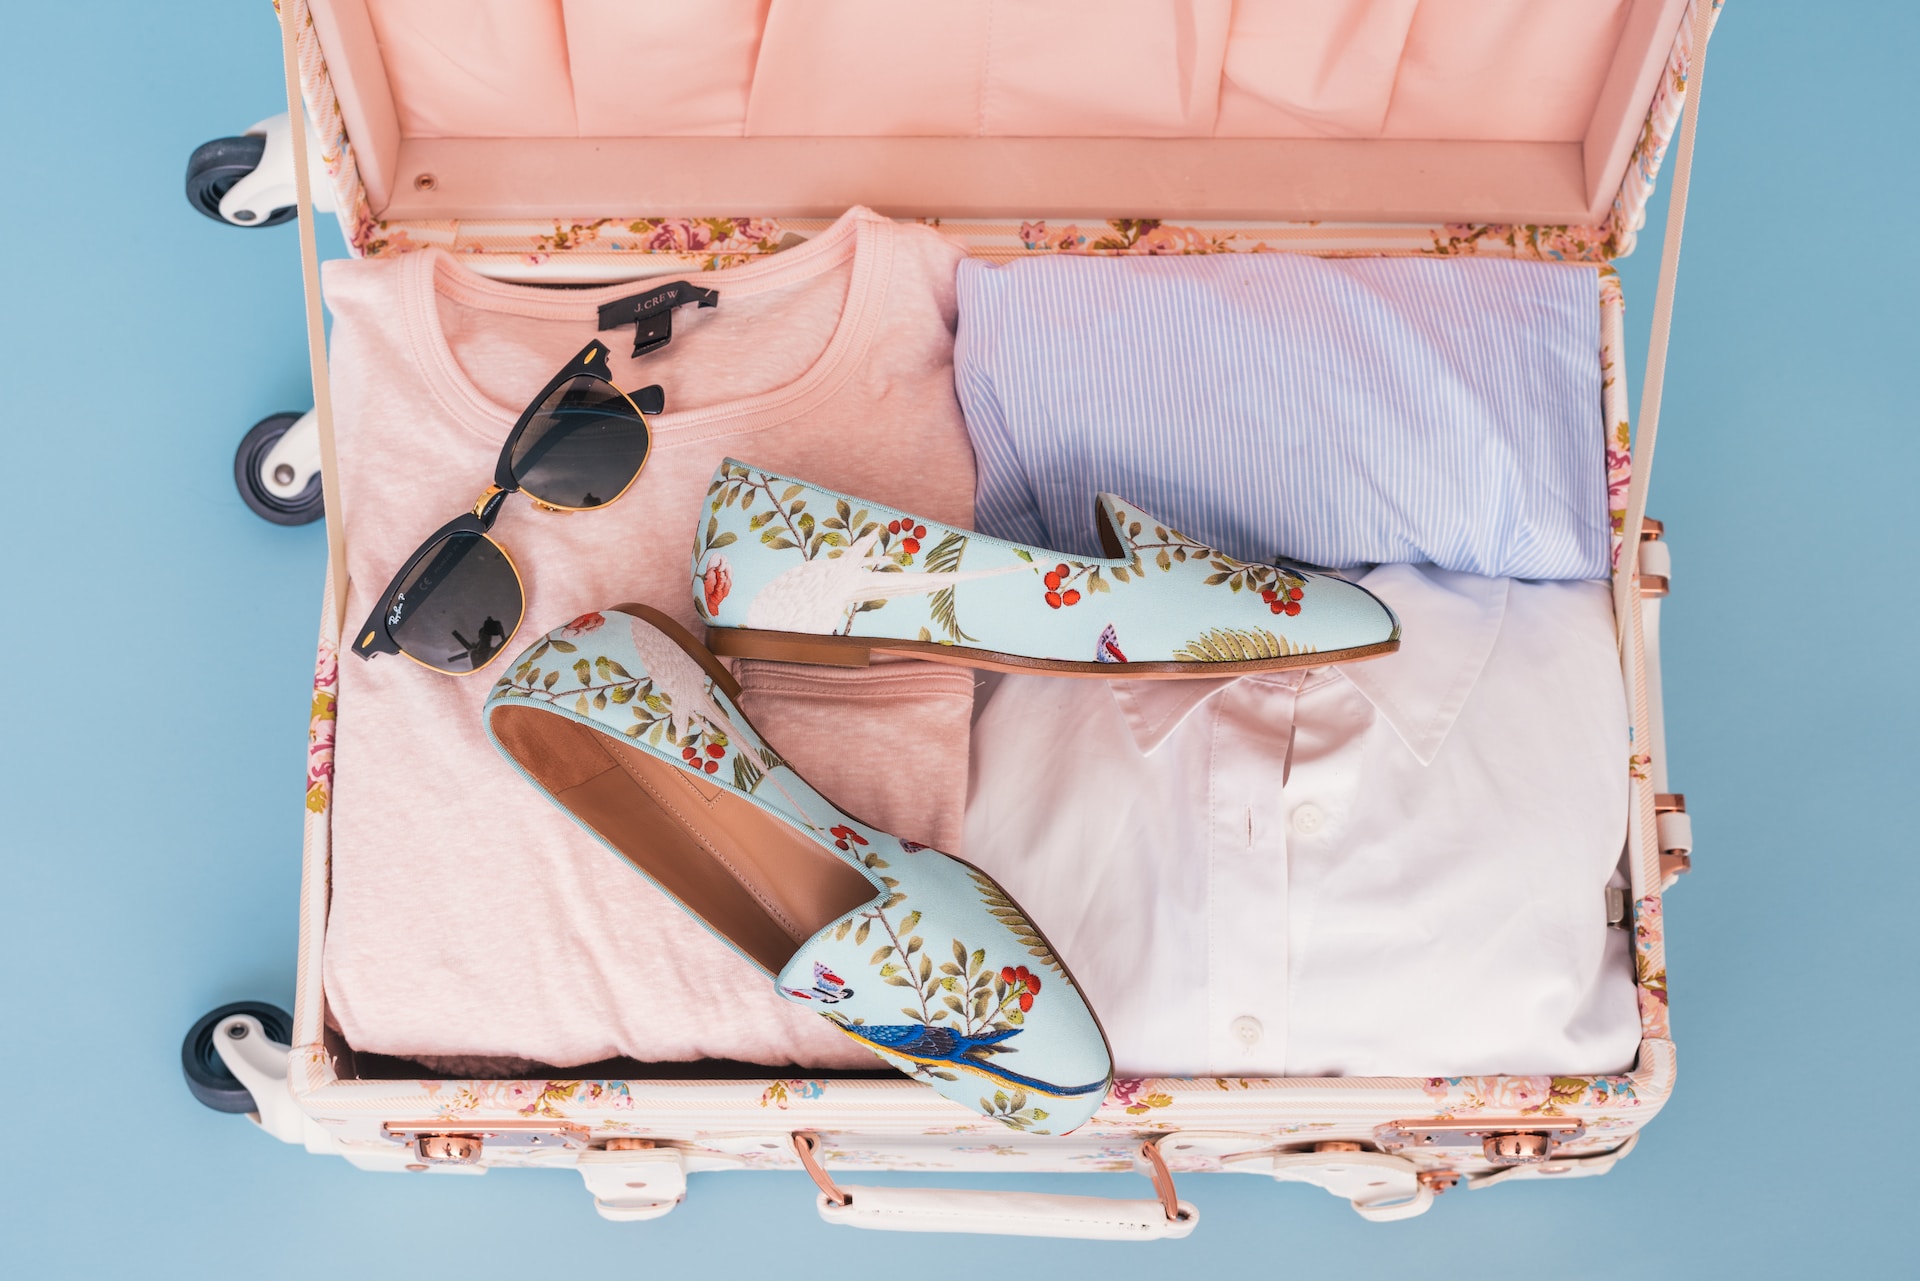 Packing for Any Destination: A Comprehensive Checklist To Keeping It Classy